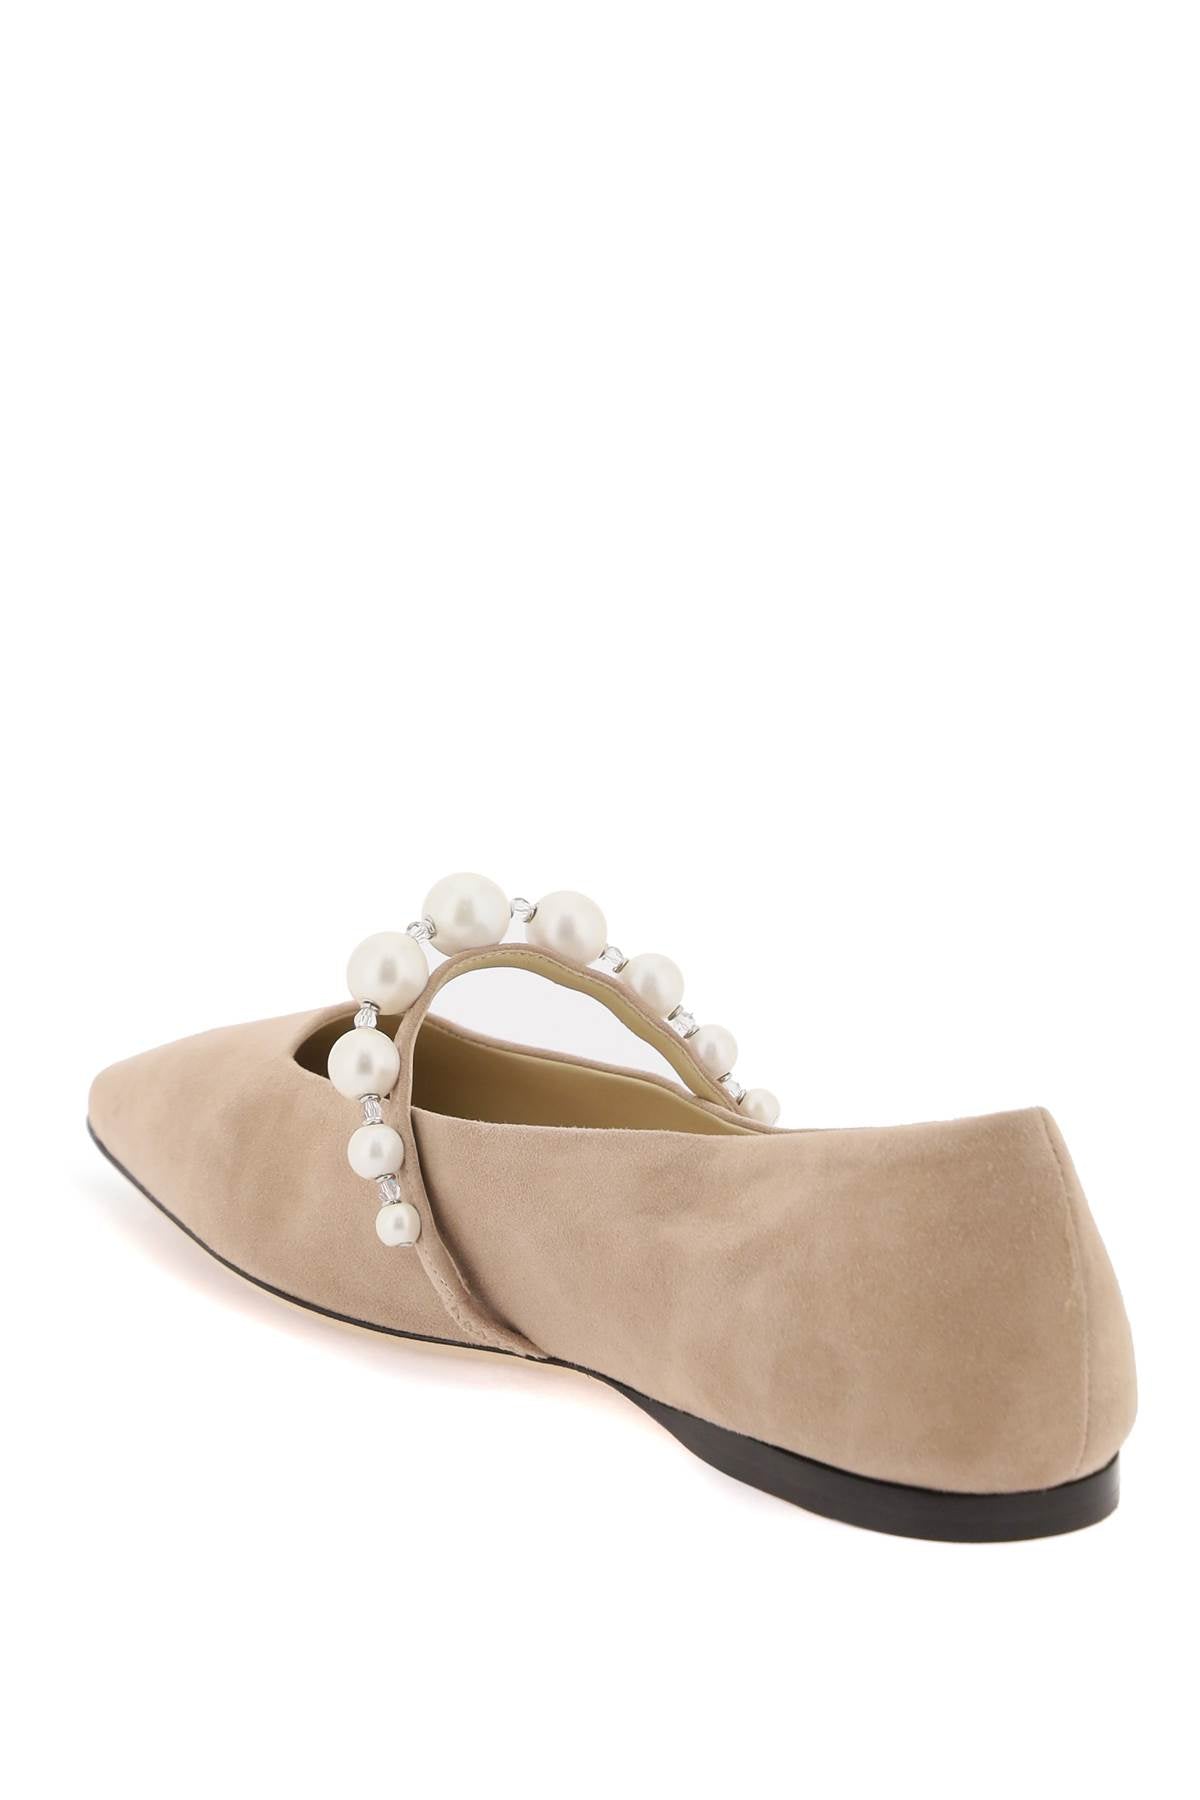 Jimmy choo suede leather ballerina flats with pearl-2